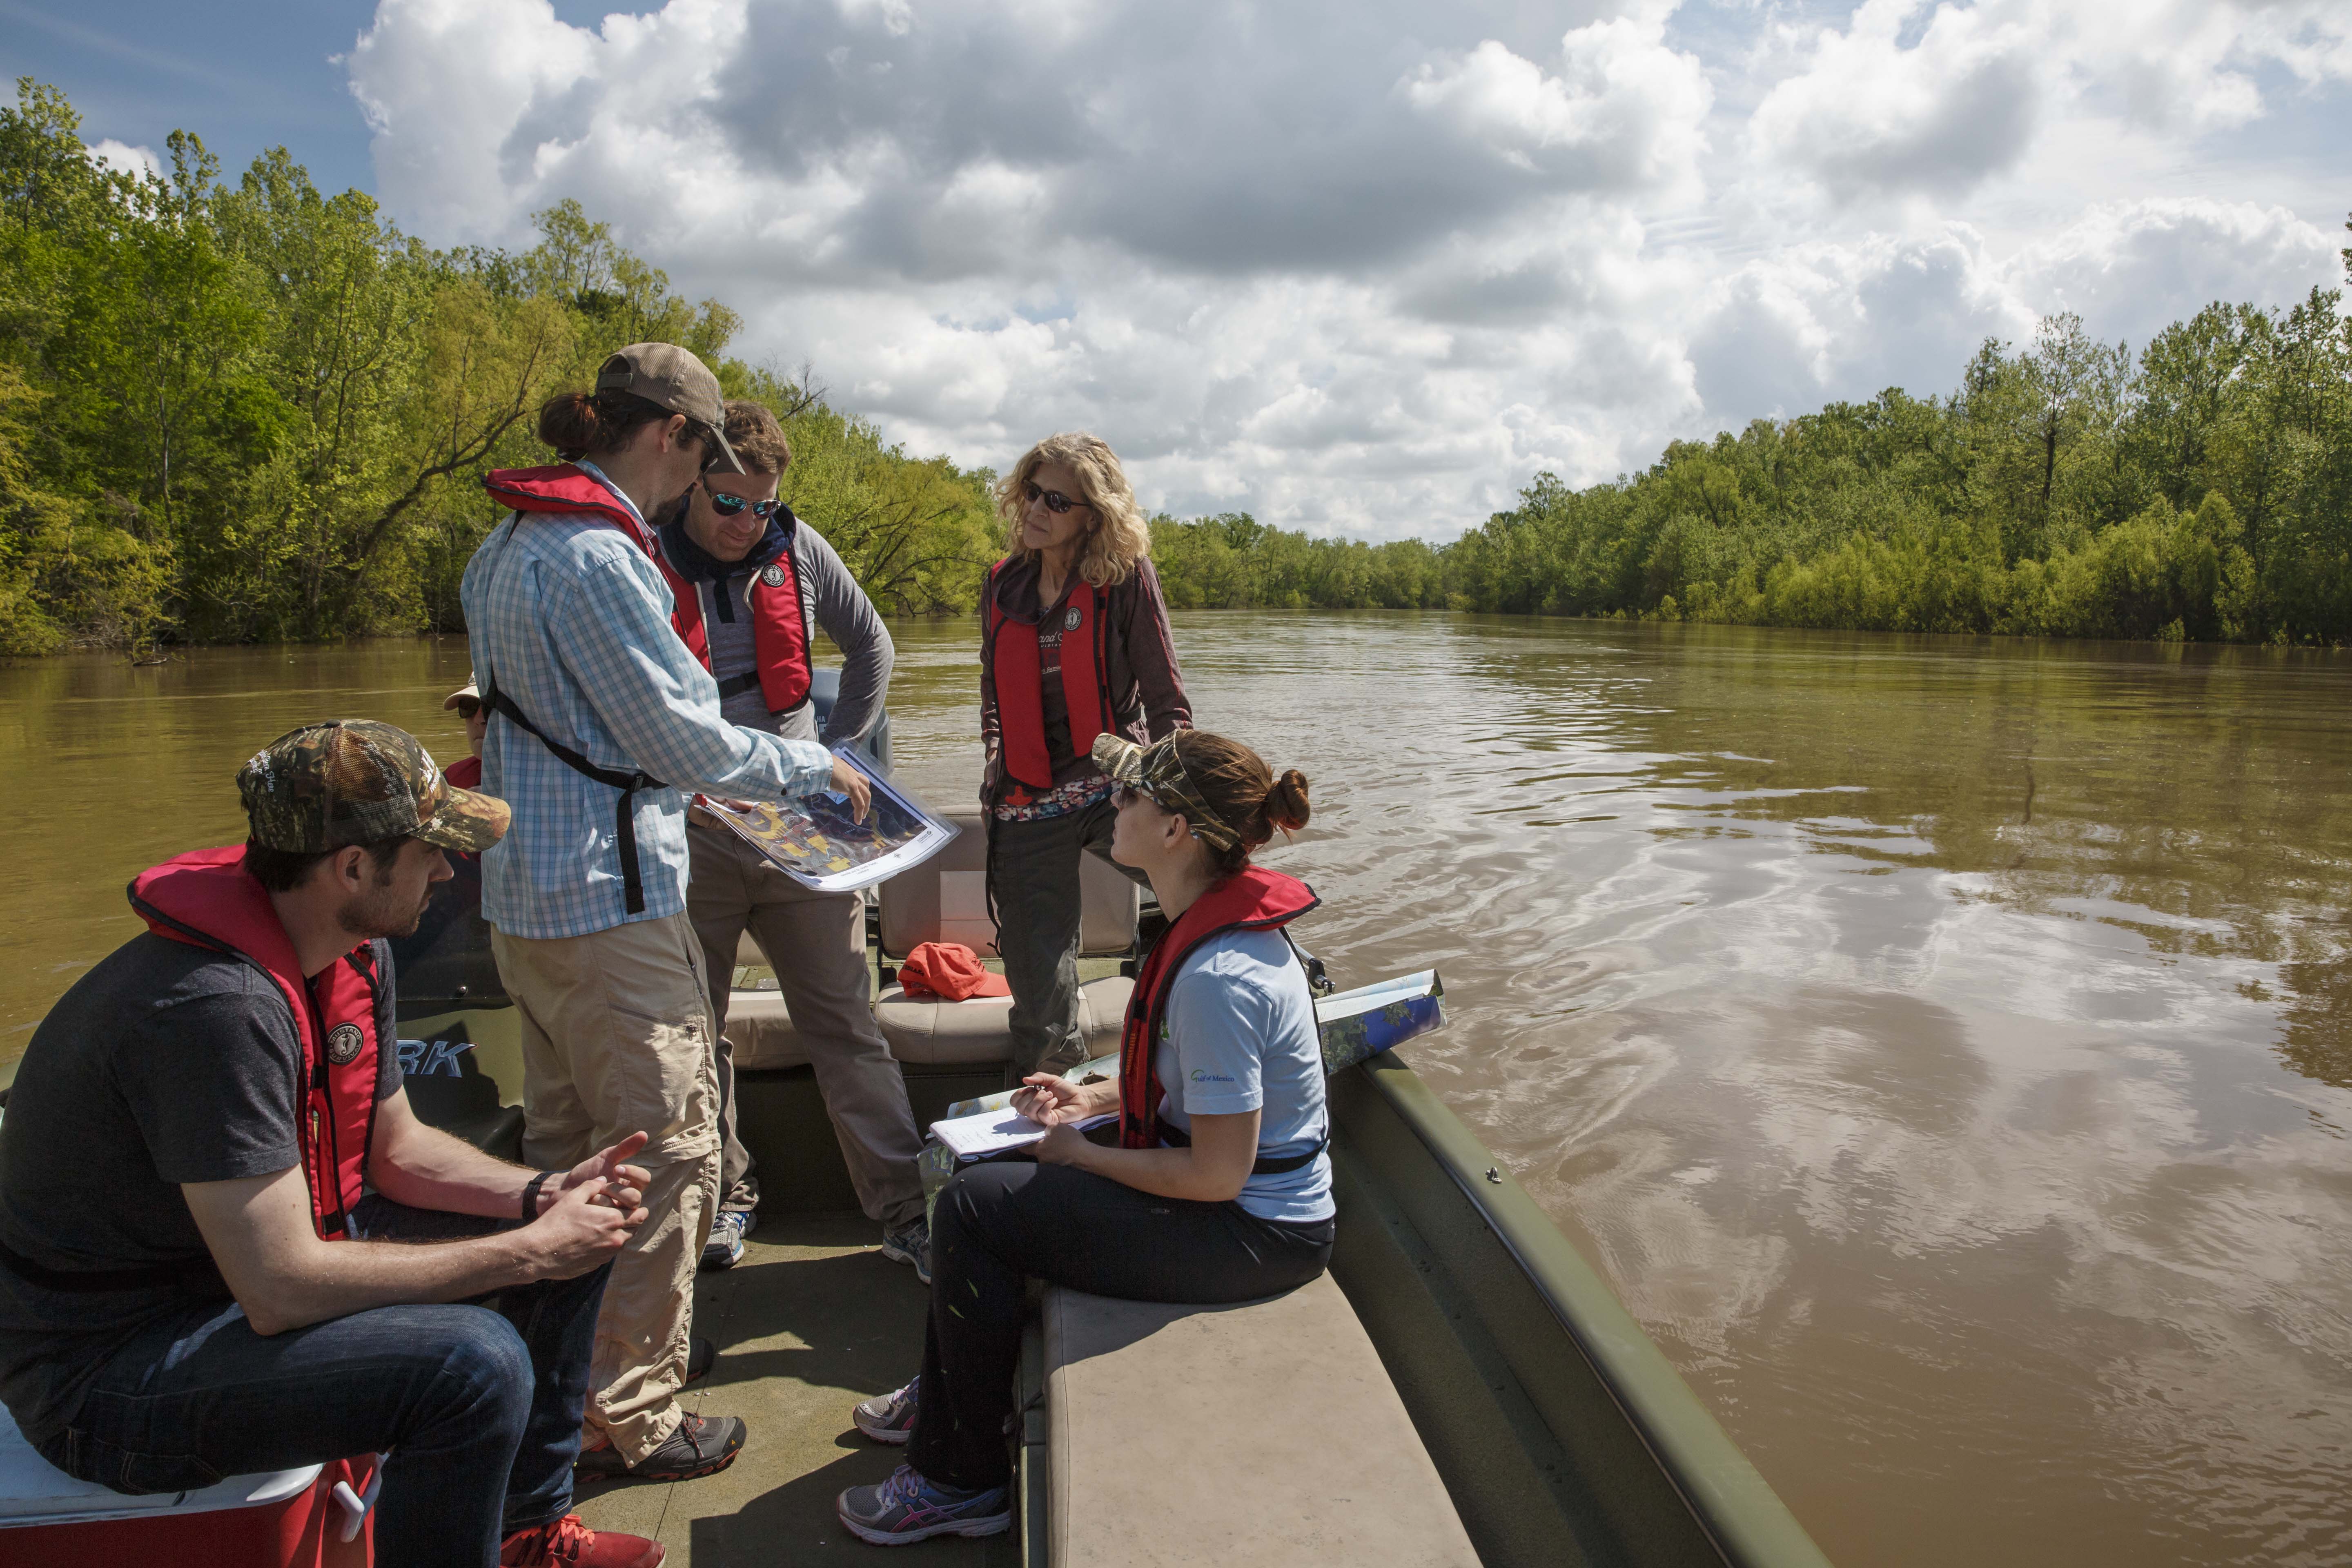 A group of people on a boat in the Atchafalaya River Basin.